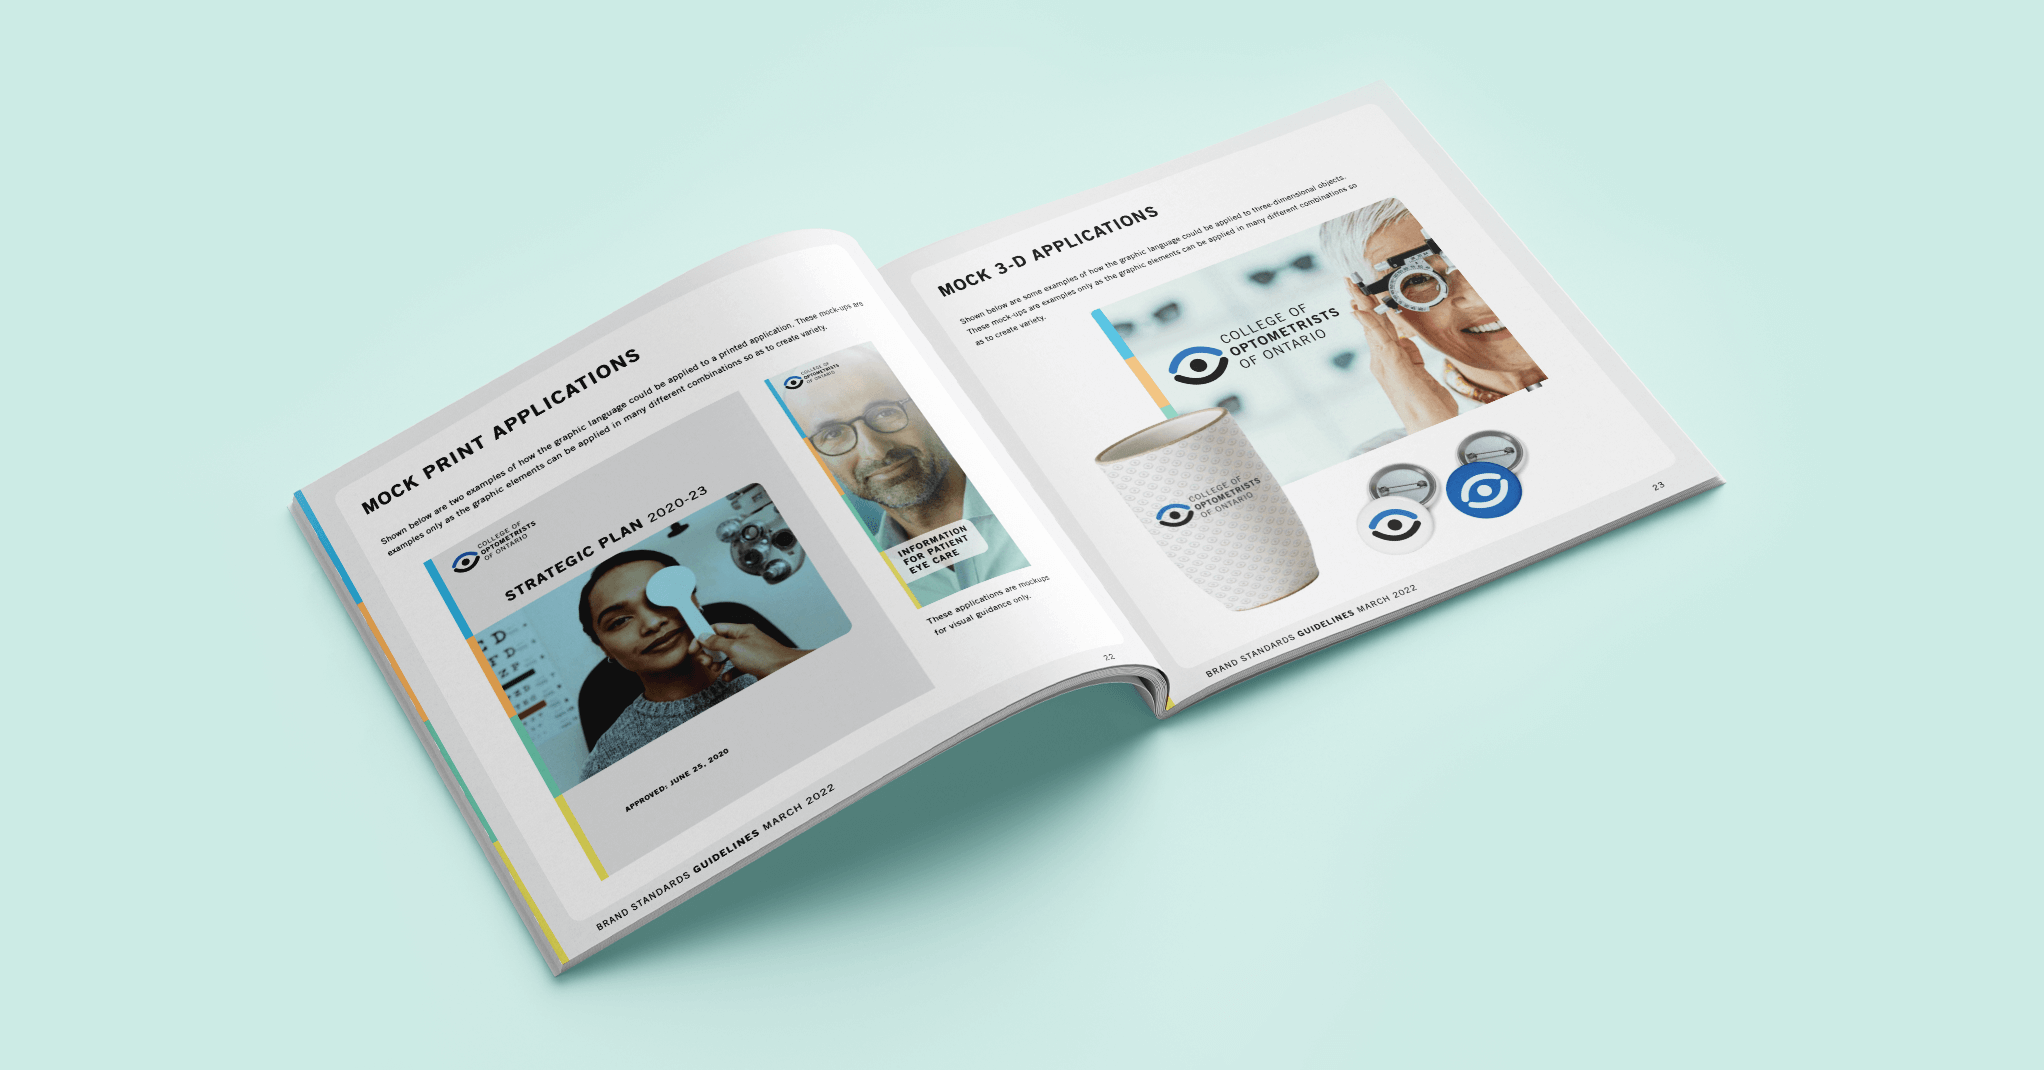 Mock print and 3D applications of the brand standards guide design for the College of Optometrist of Ontario.